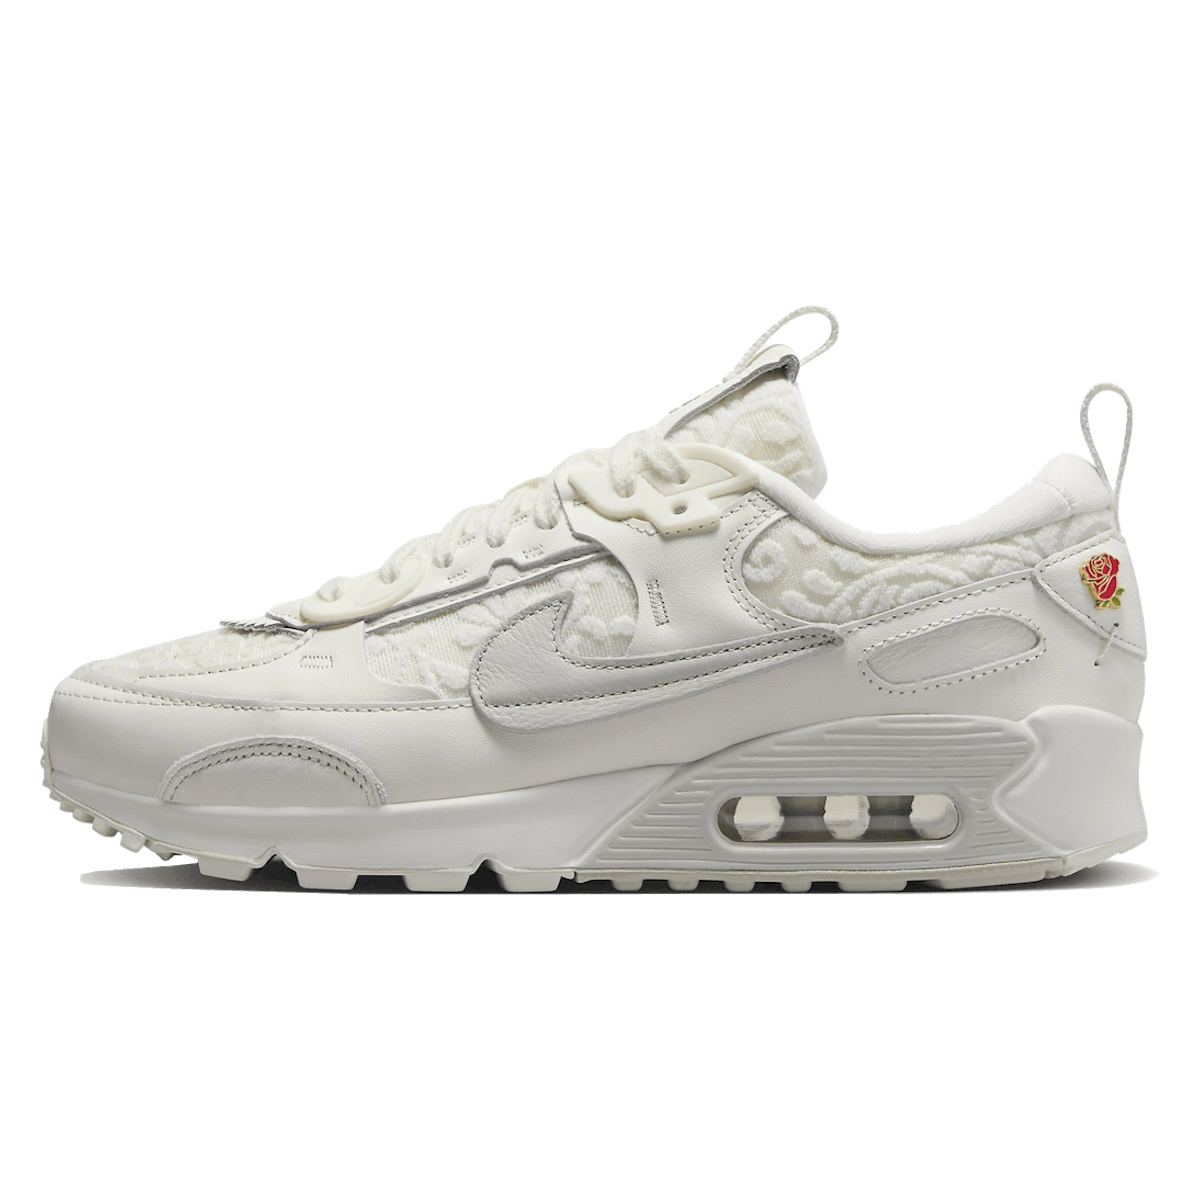 Nike Air Max 90 Futura Wmns "Give Her Flowers"